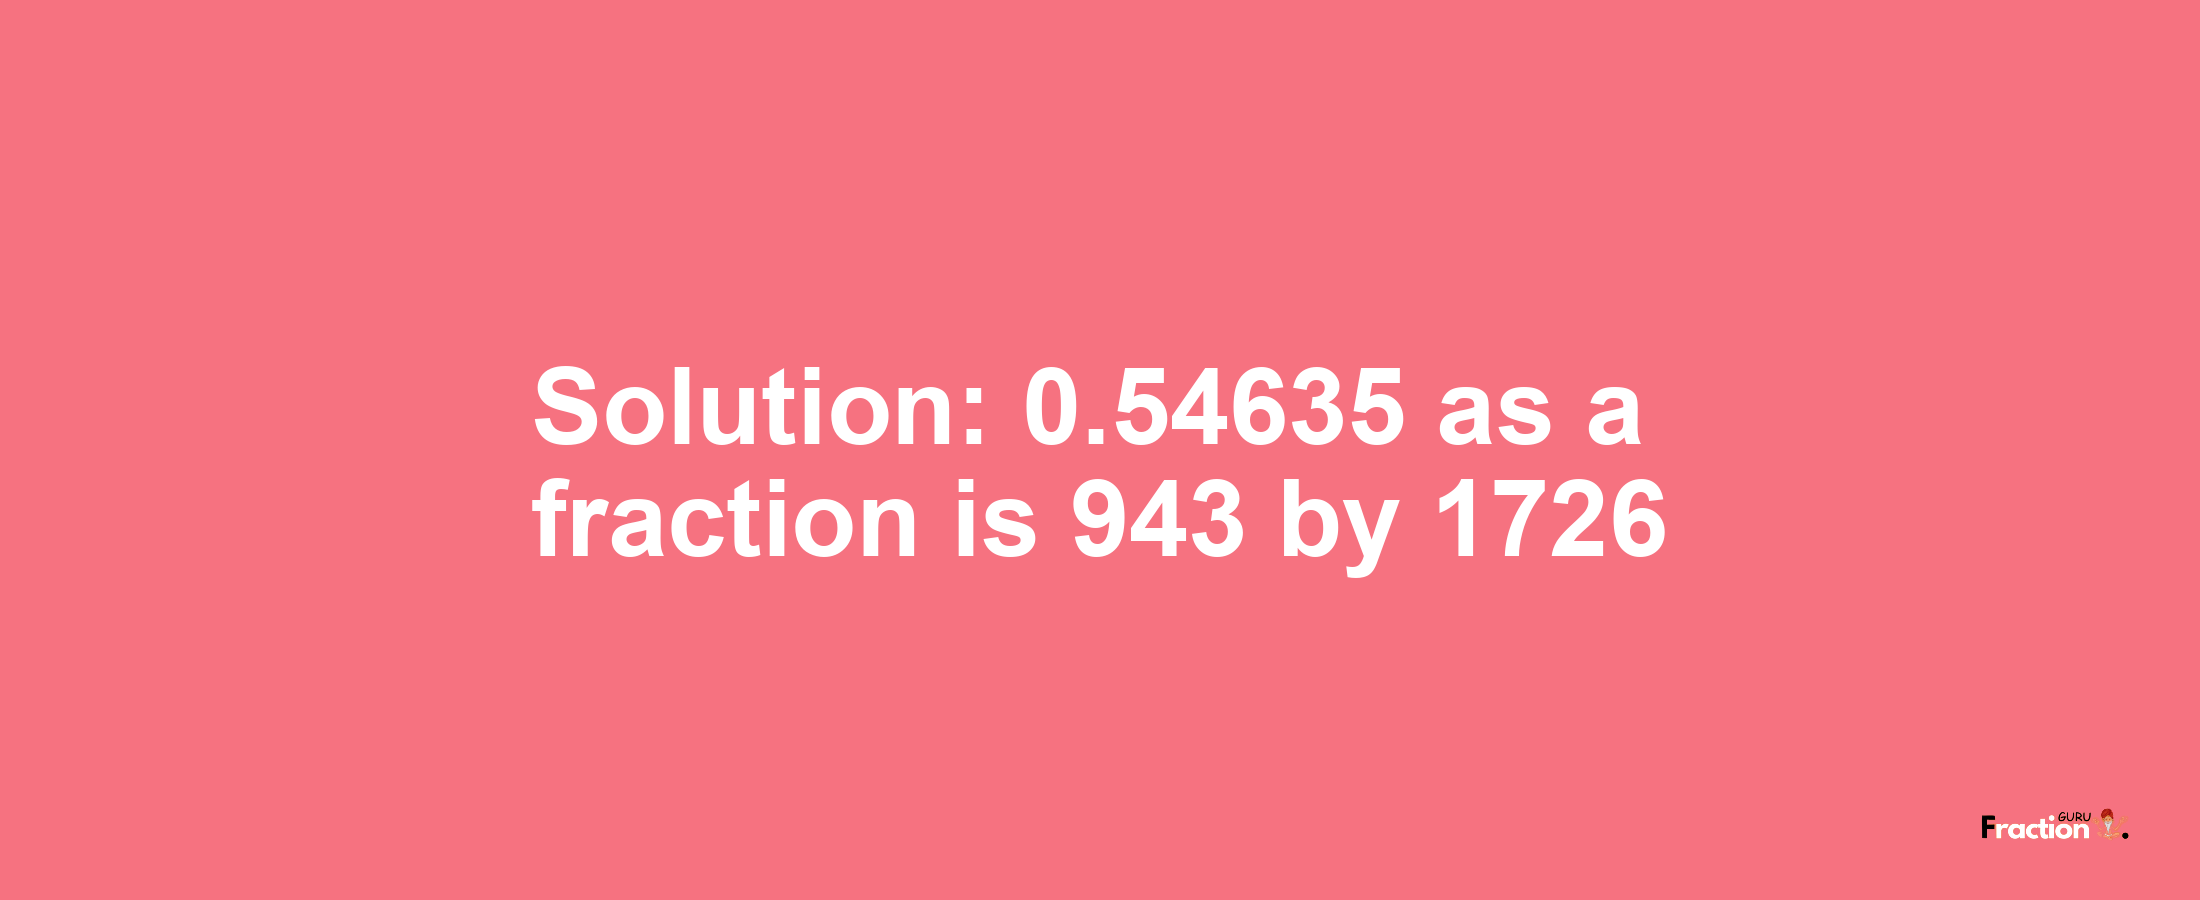 Solution:0.54635 as a fraction is 943/1726